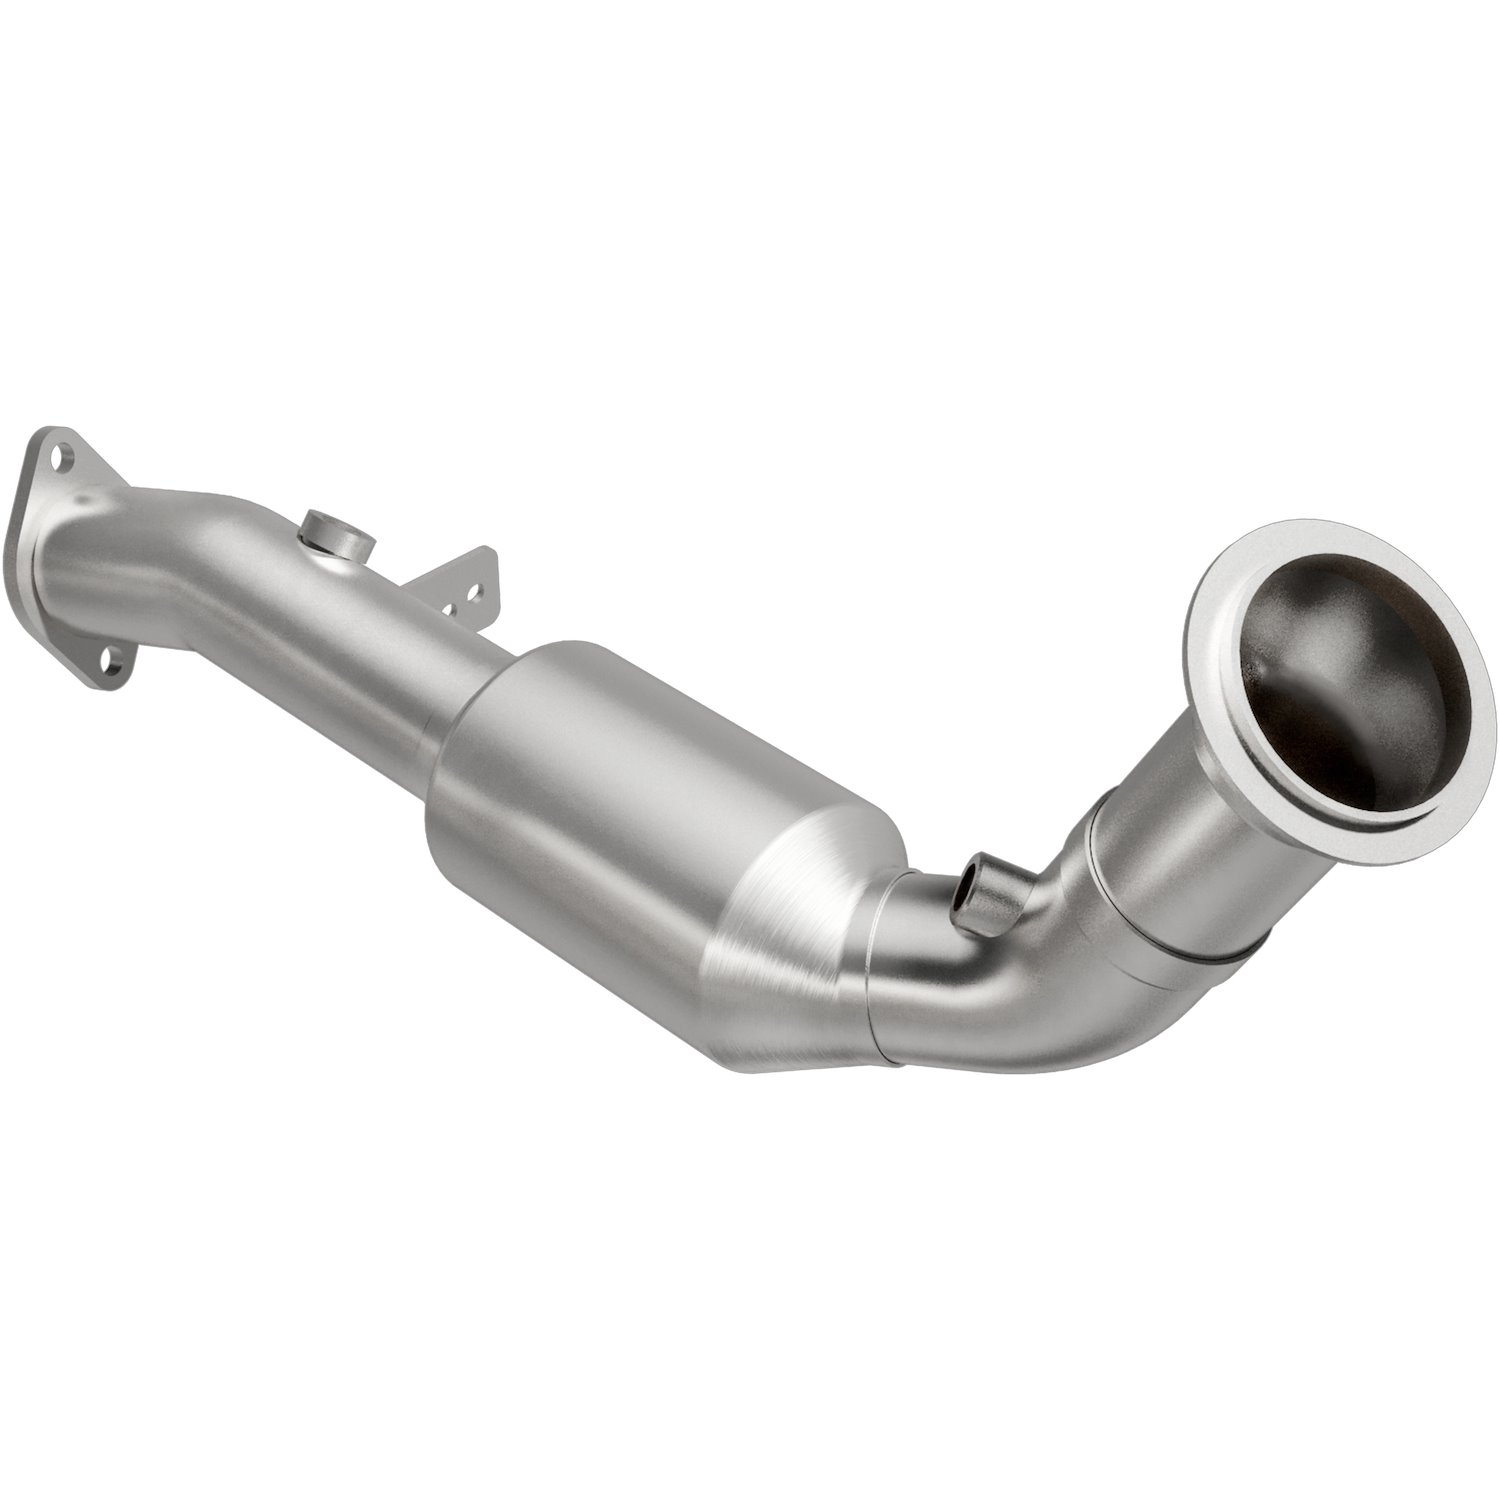 OEM Grade Federal / EPA Compliant Direct-Fit Catalytic Converter 49779